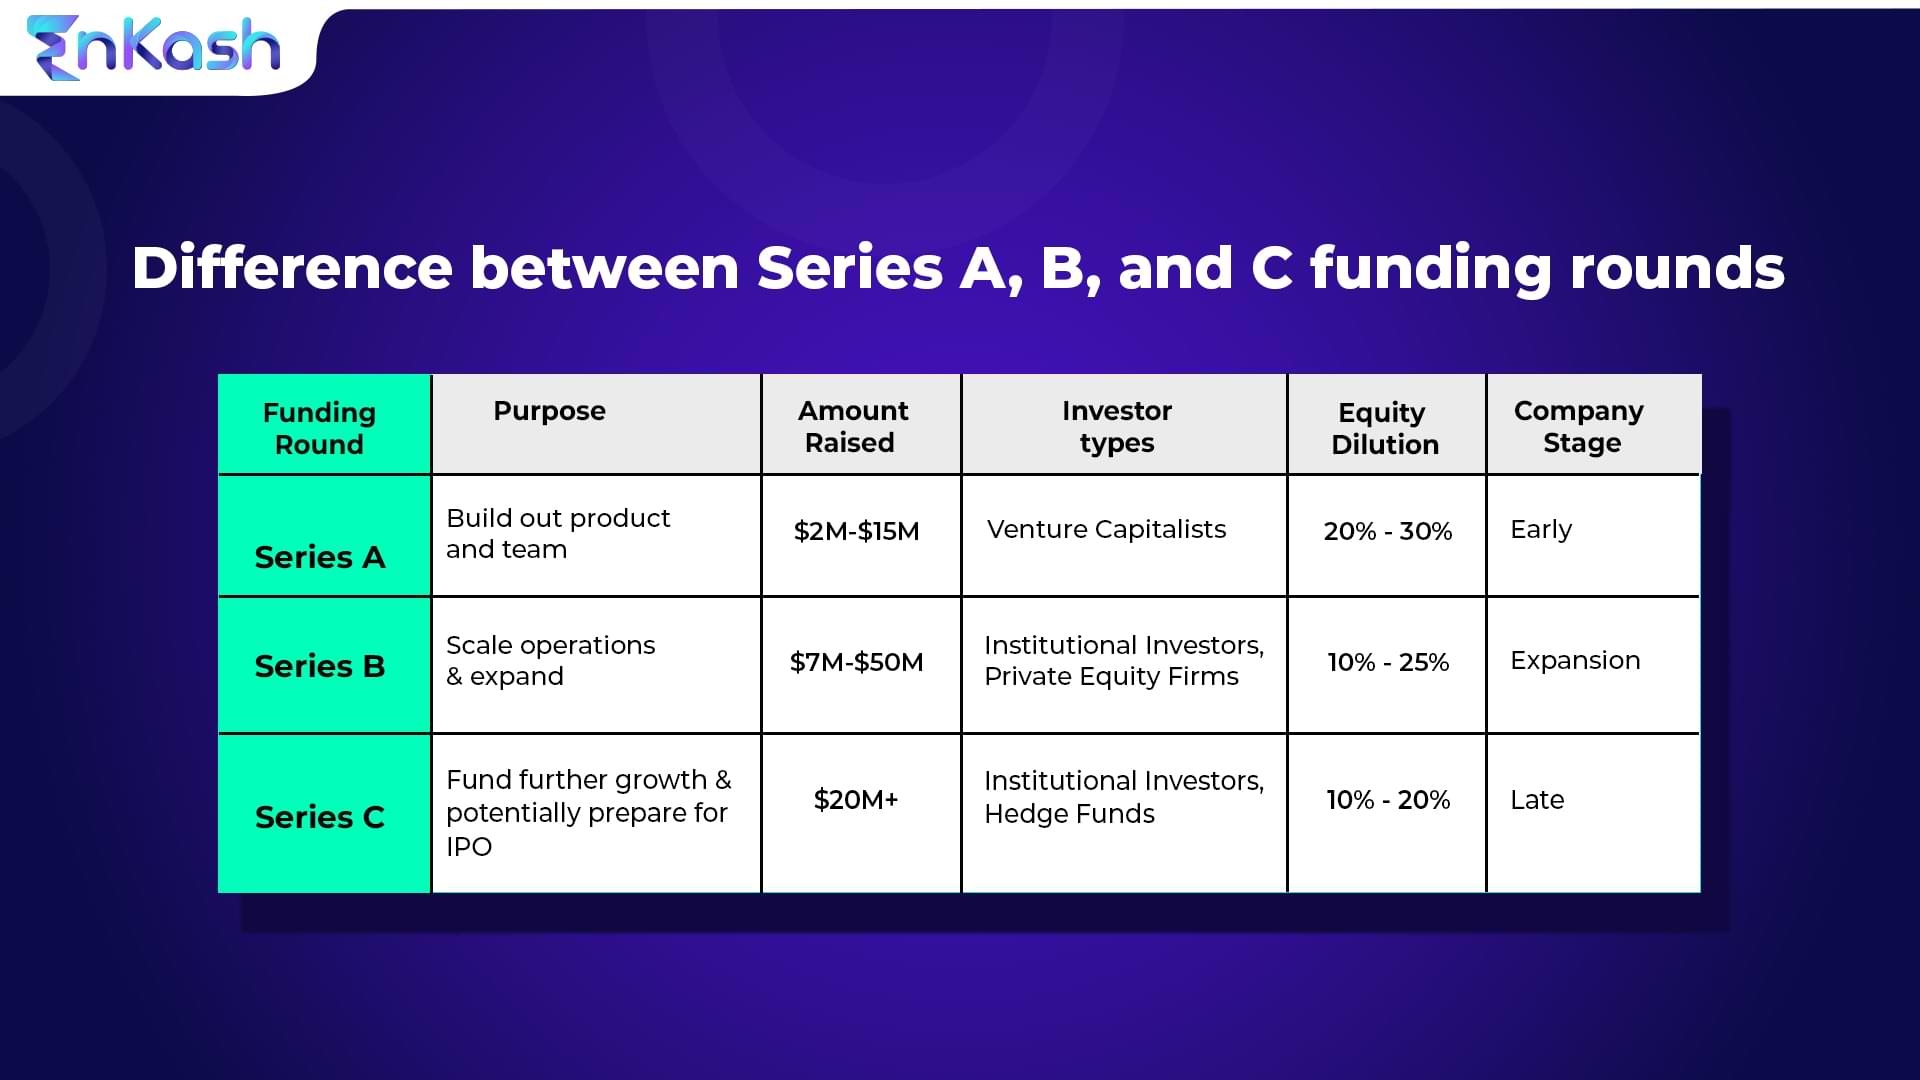 Difference between Series A, B, and C funding